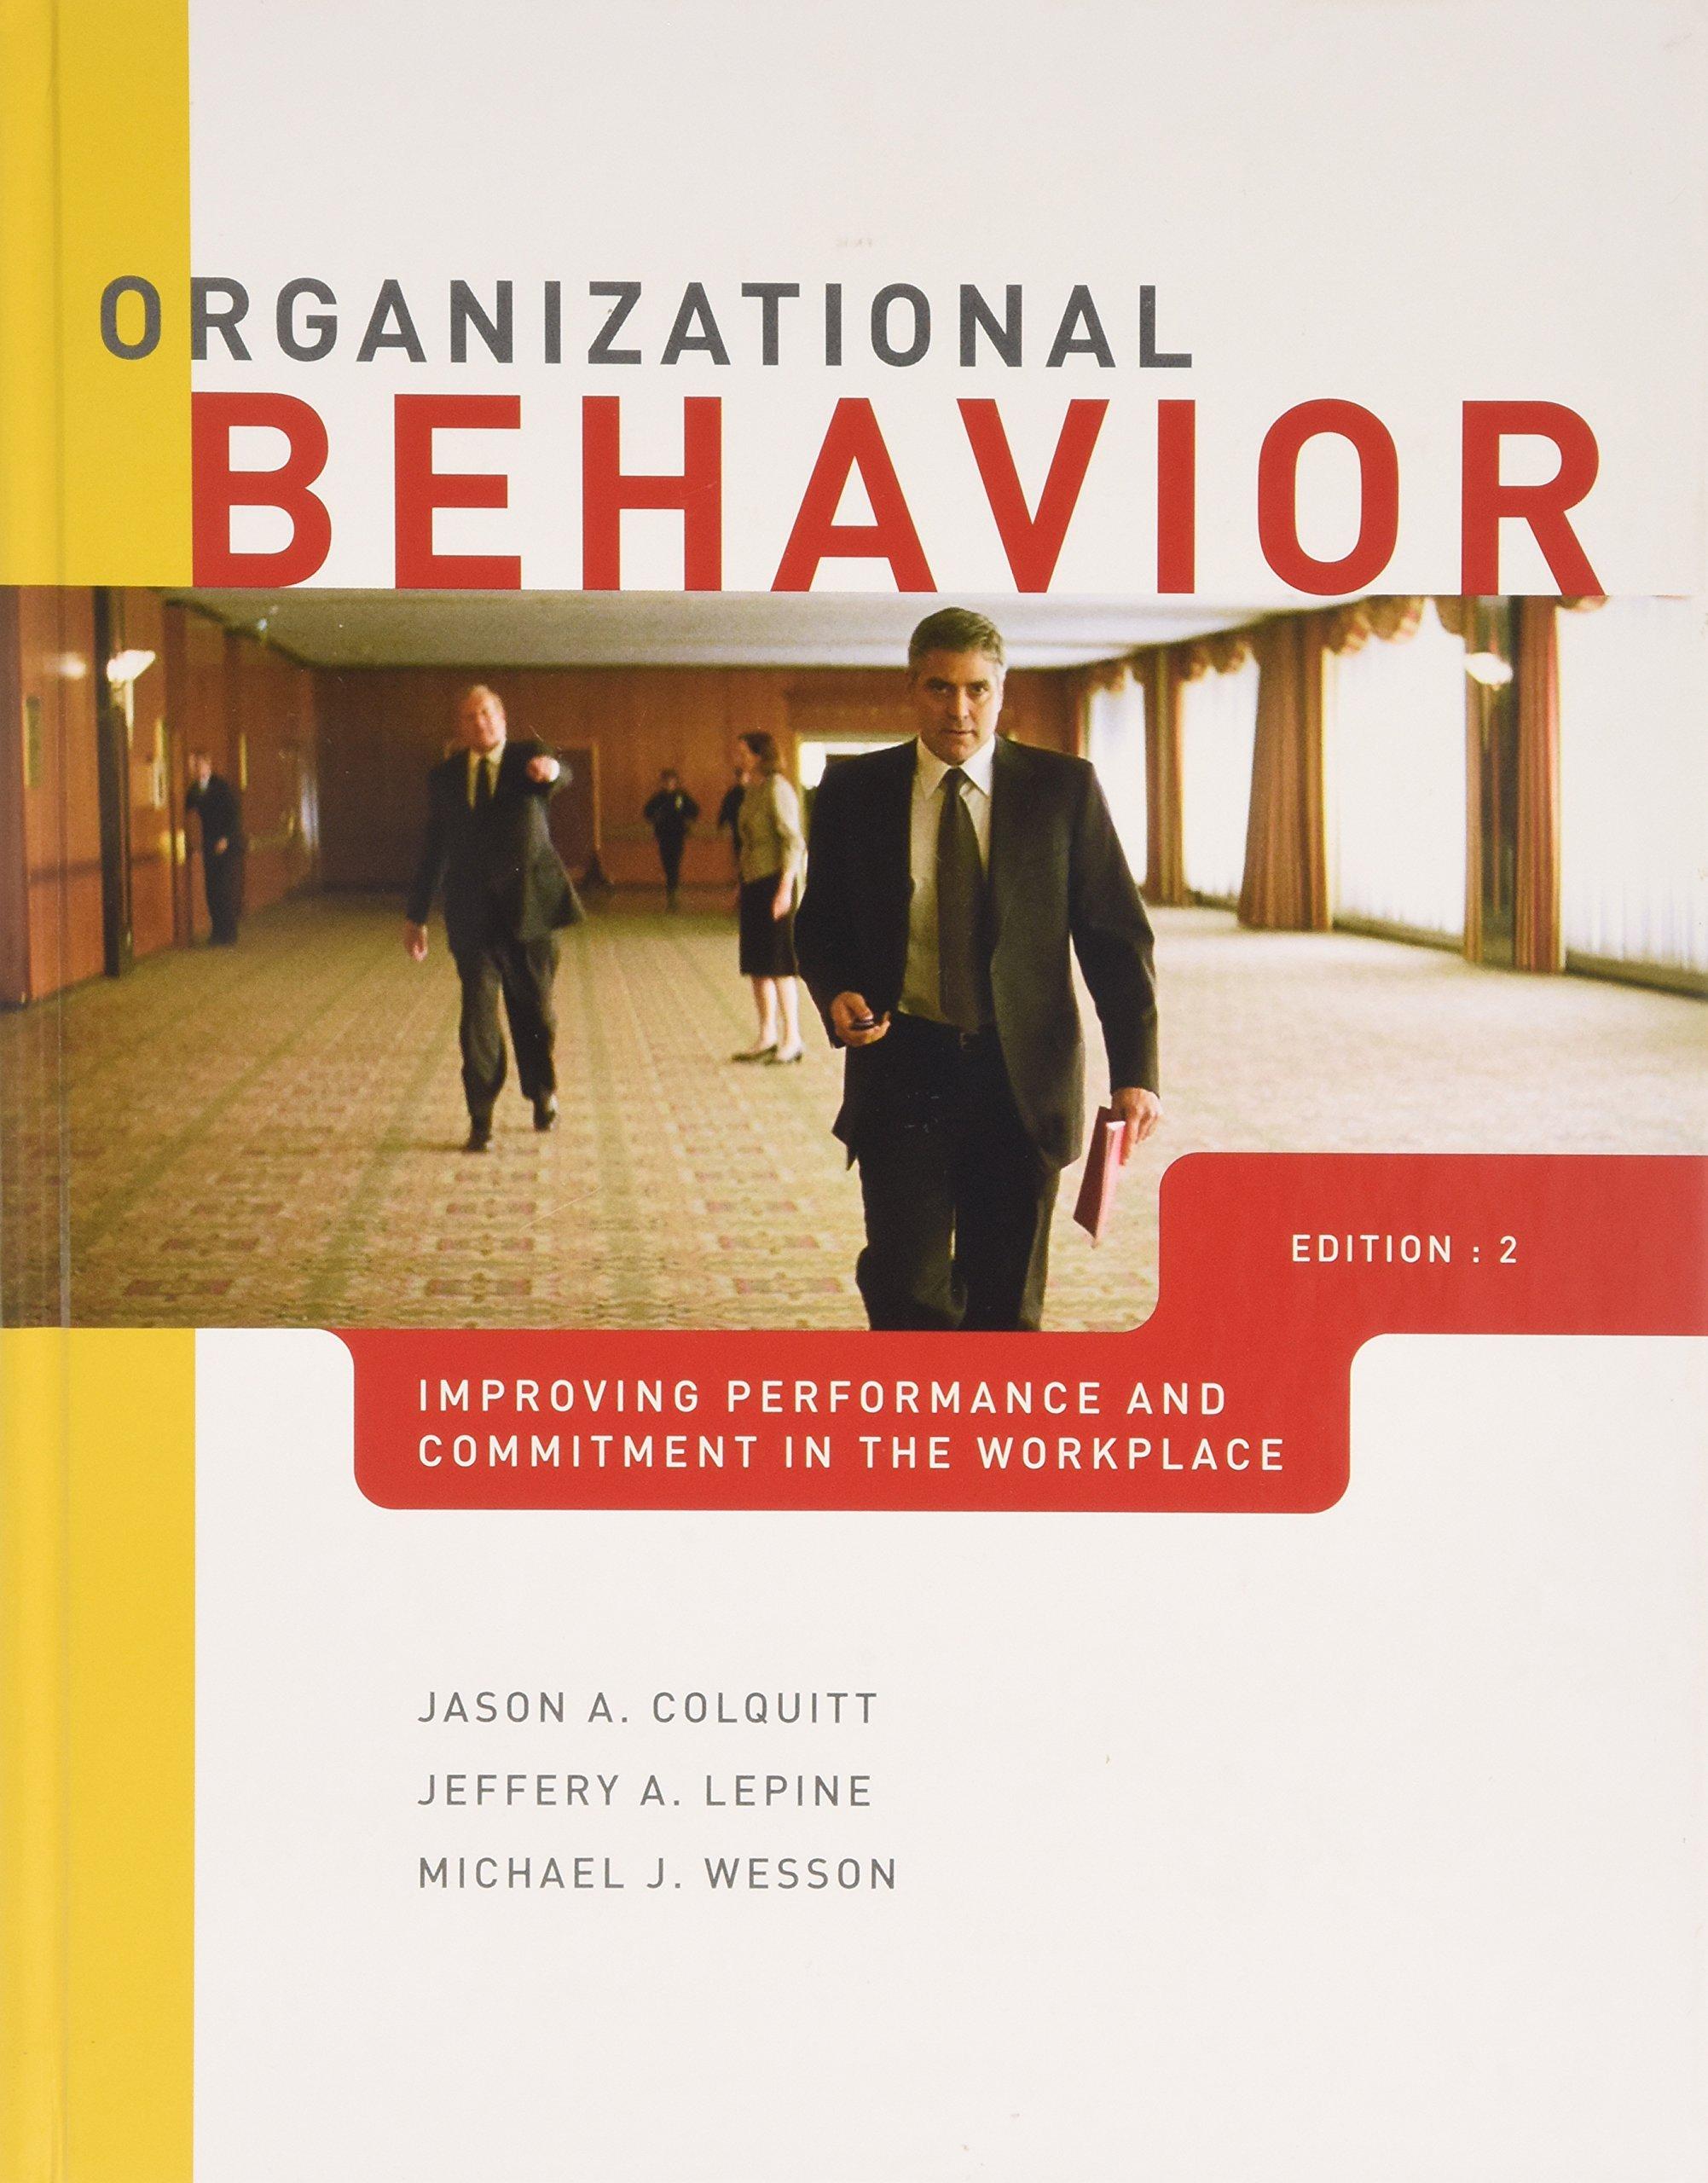 organizational behavior improving performance and commitment in the workplace 2nd edition jason a. colquitt,